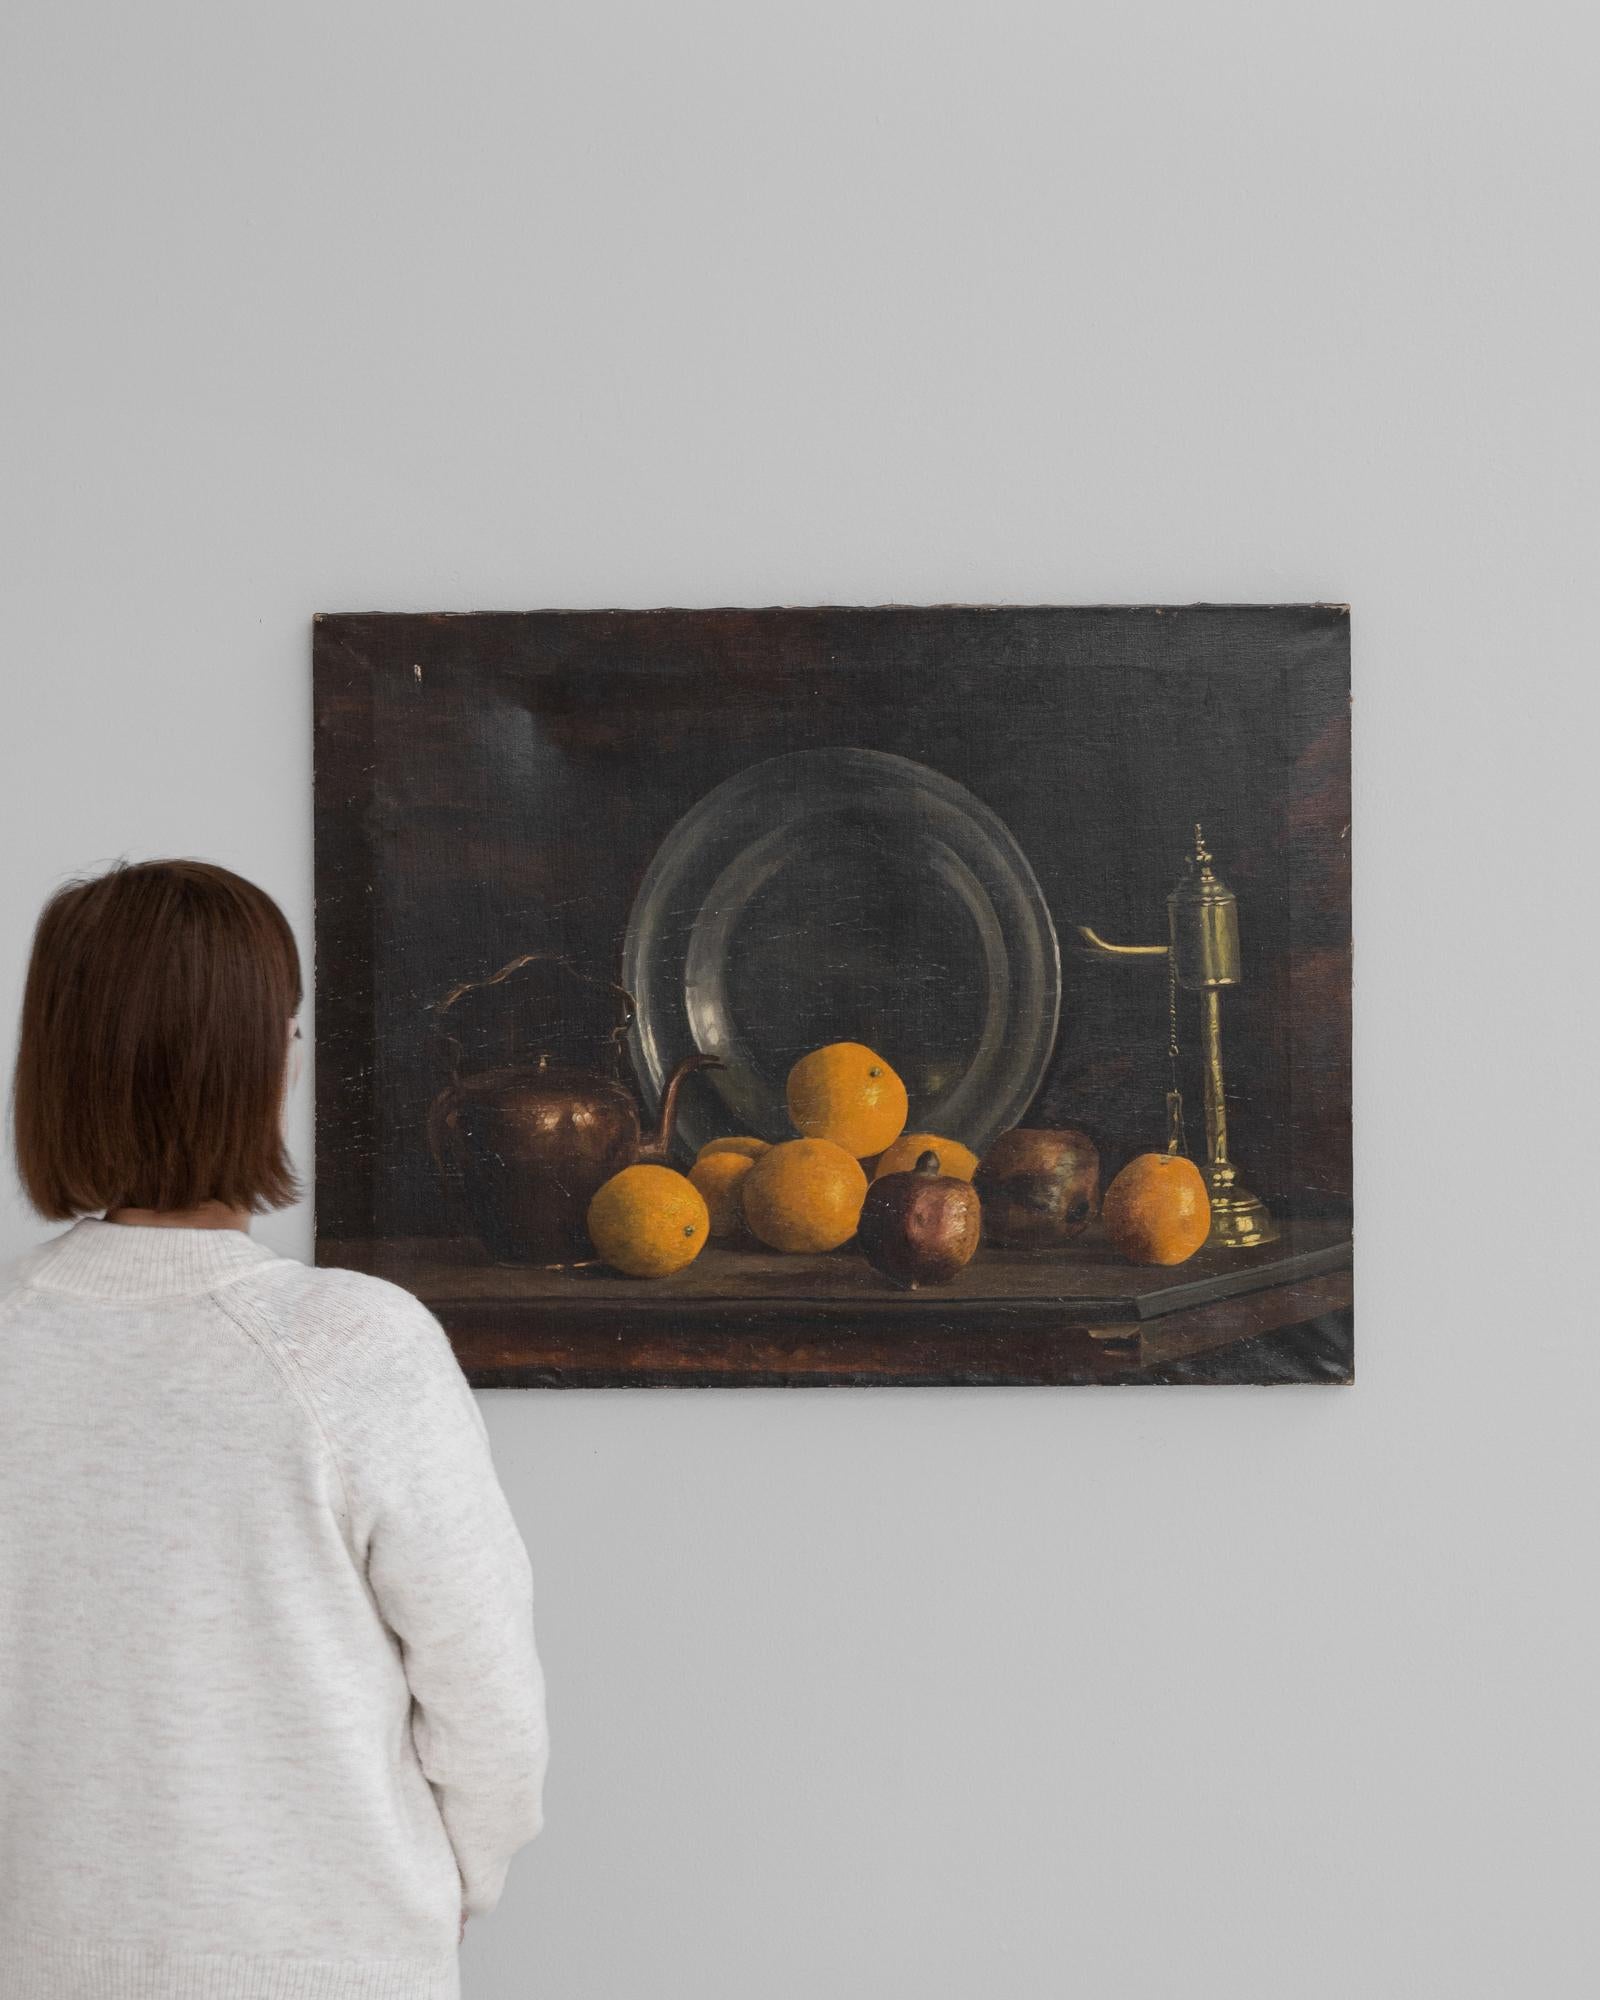 This Early 20th Century Belgian Painting is a classic still life that speaks to the skill and subtle brilliance of its creator. Set against a dark, understated background, the composition allows each element to resonate with a quiet intensity. The